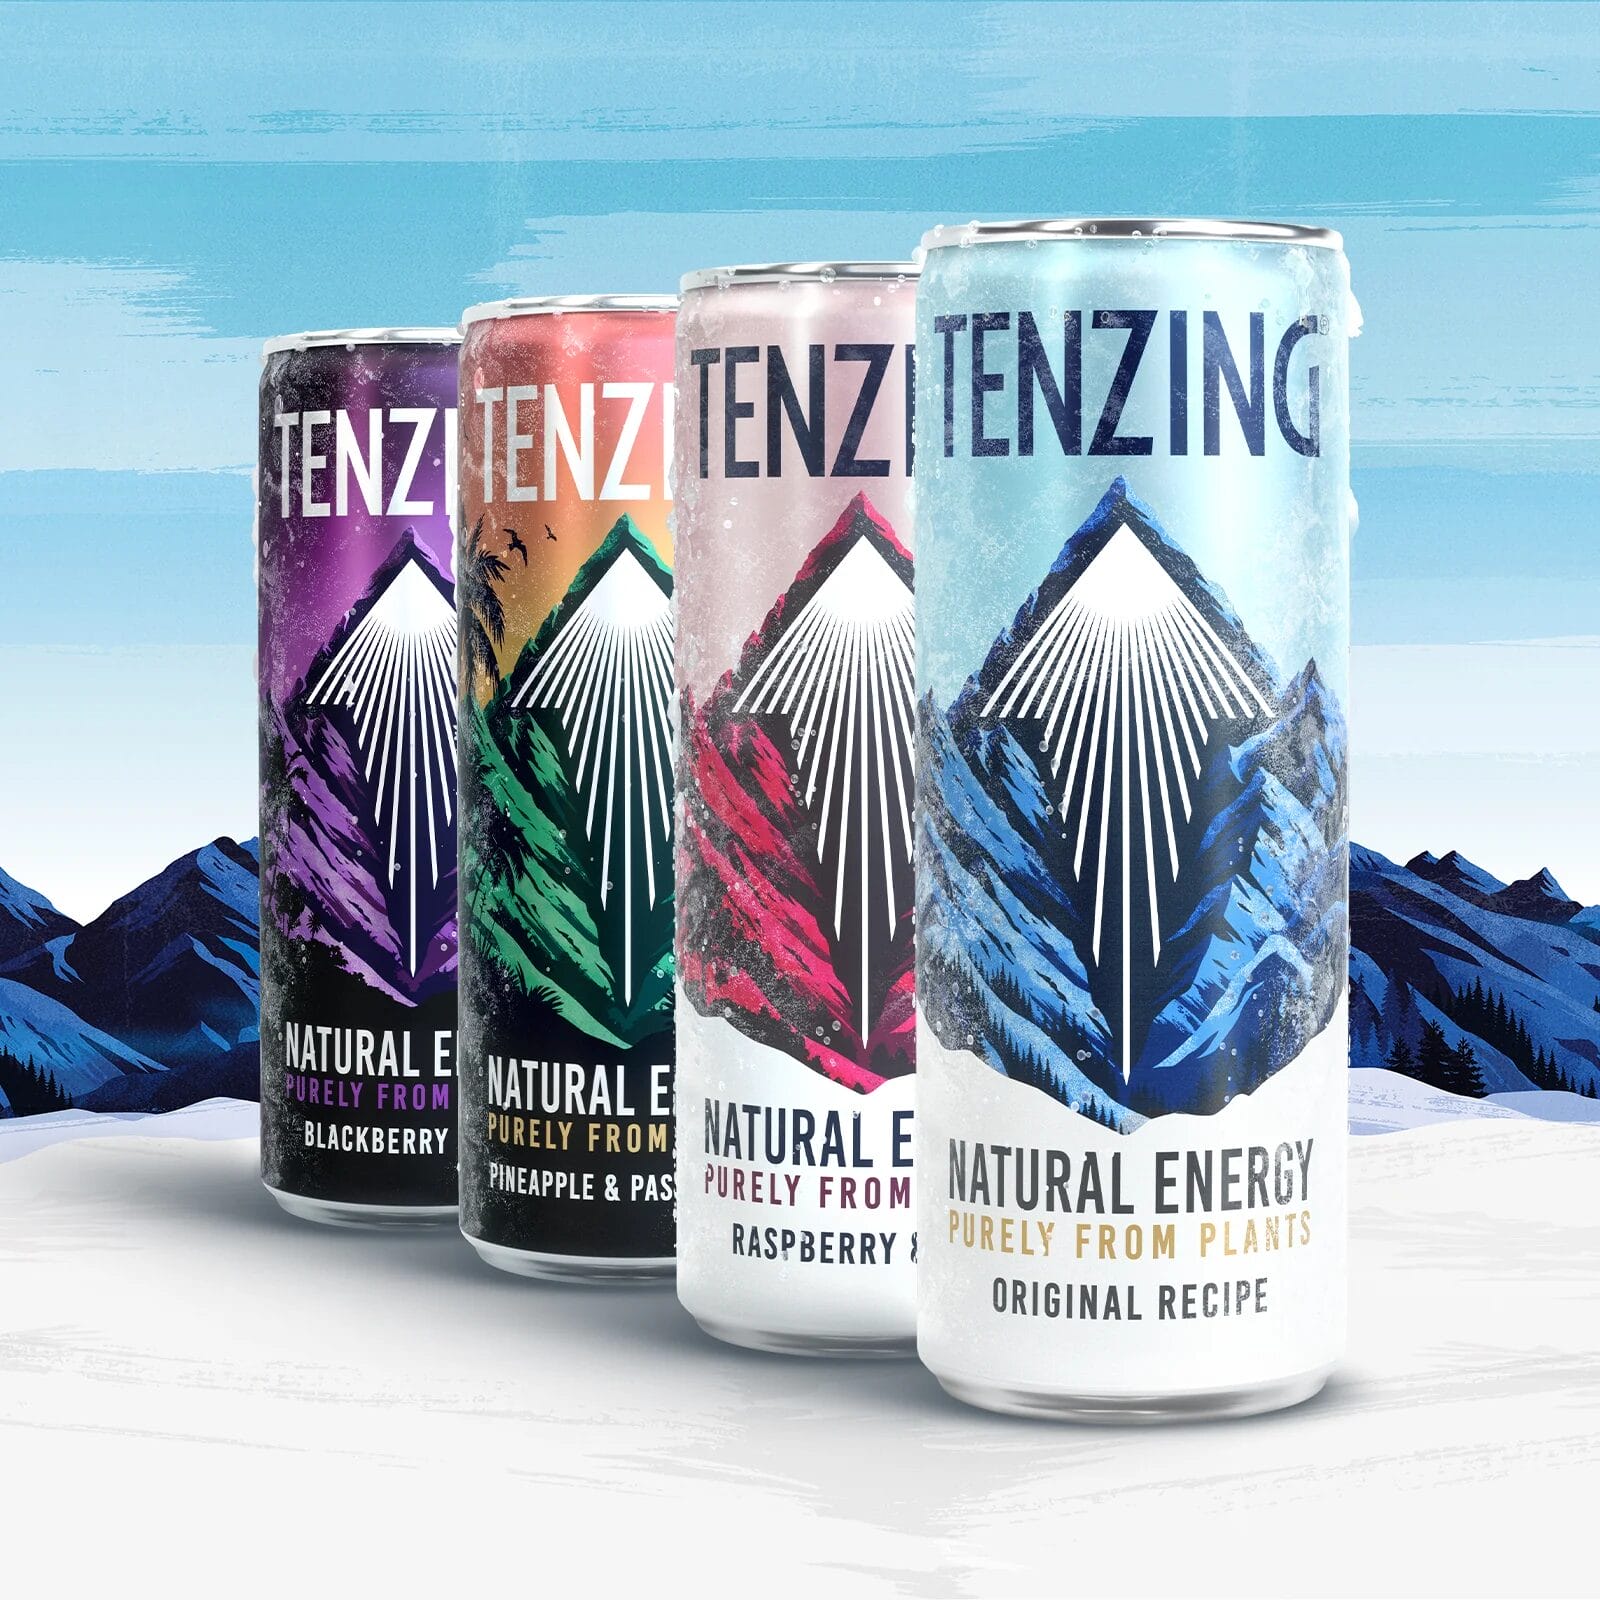 Tenzing cans